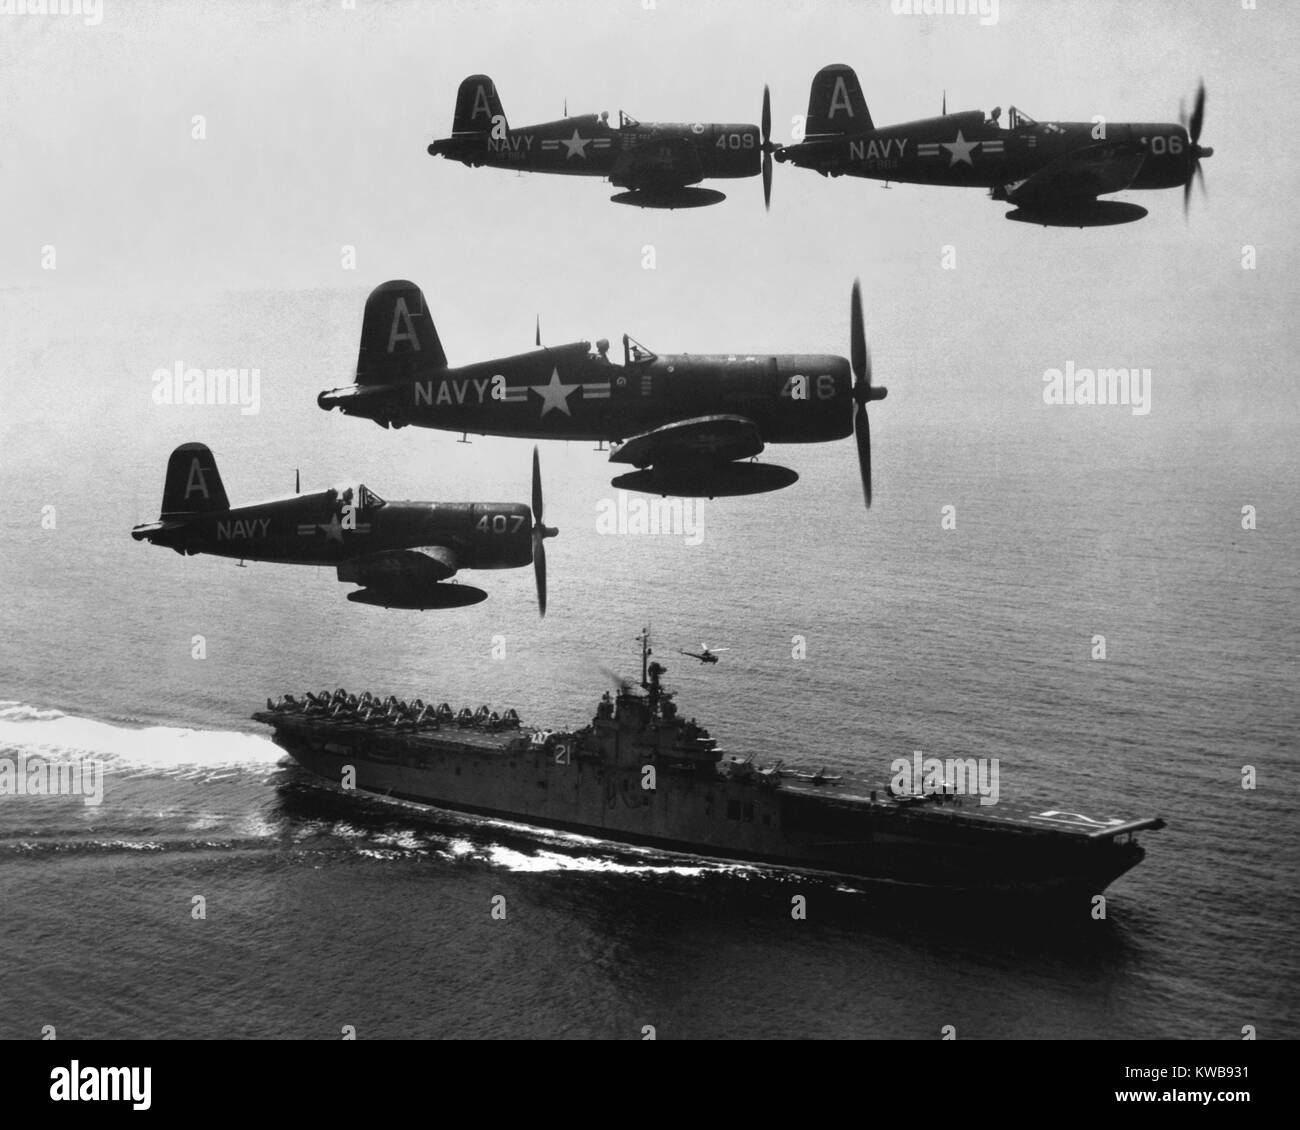 F4U's (Corsairs) returning from a combat mission over North Korea to the USS Boxer. Planes in the next strike are about to be launched from the carrier flight deck. Sept. 4, 1951. Korean War. (BSLOC_2014_11_224) Stock Photo